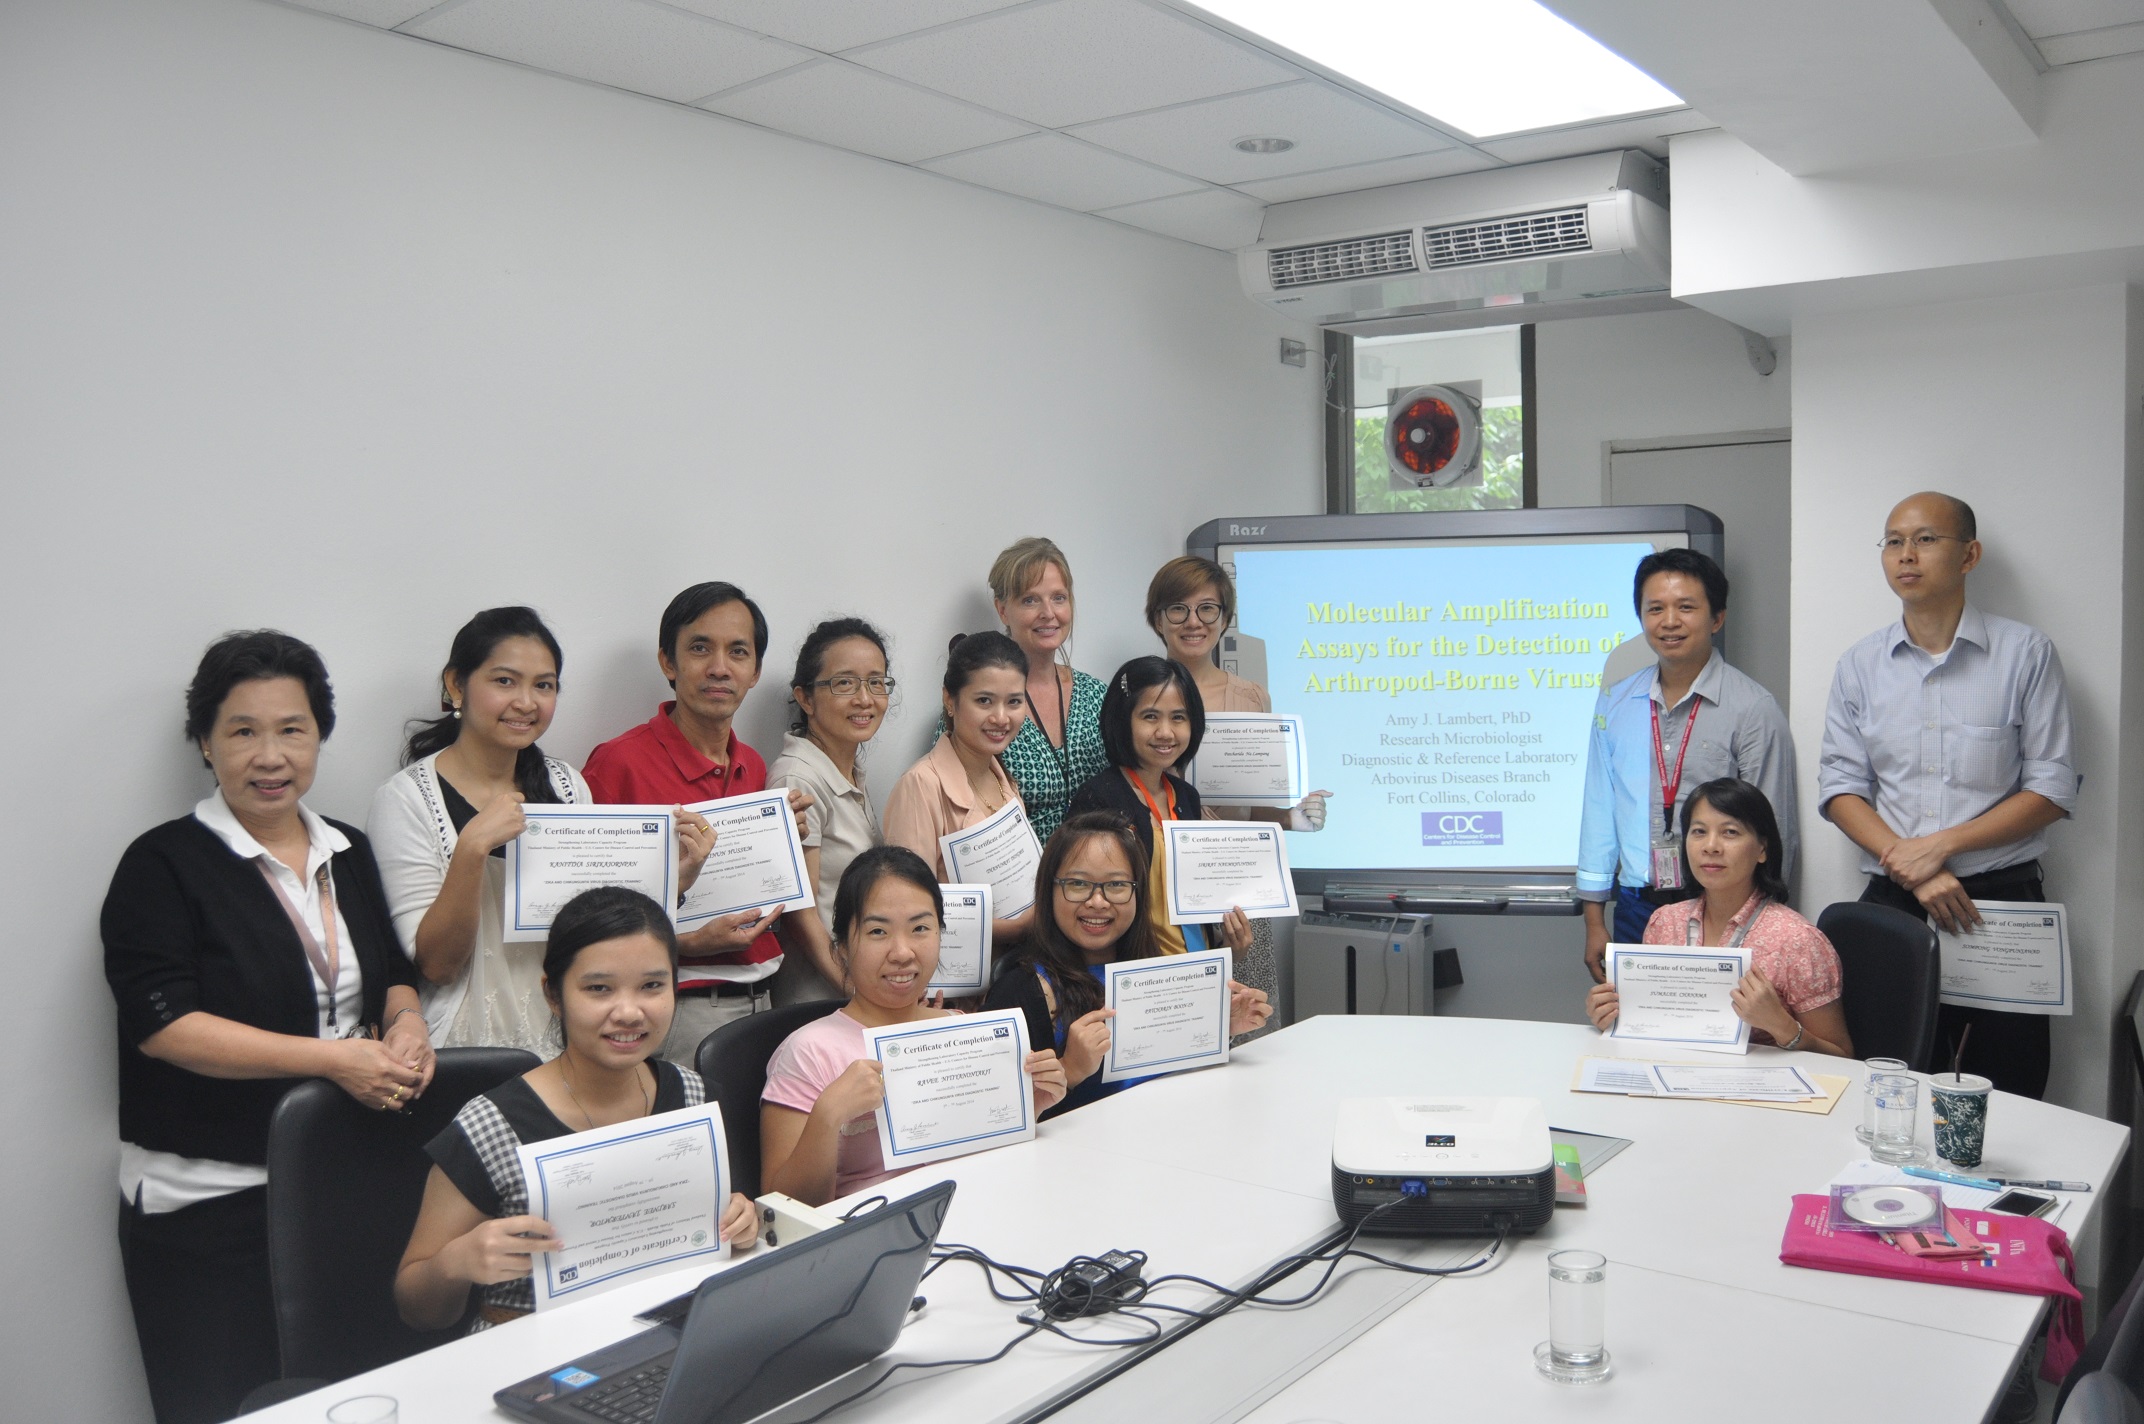 Laboratory workers from the National Institute of Health and Chulalongkorn University display certificates after successfully completing a training on how to identify Zika and Chikungunya viruses.